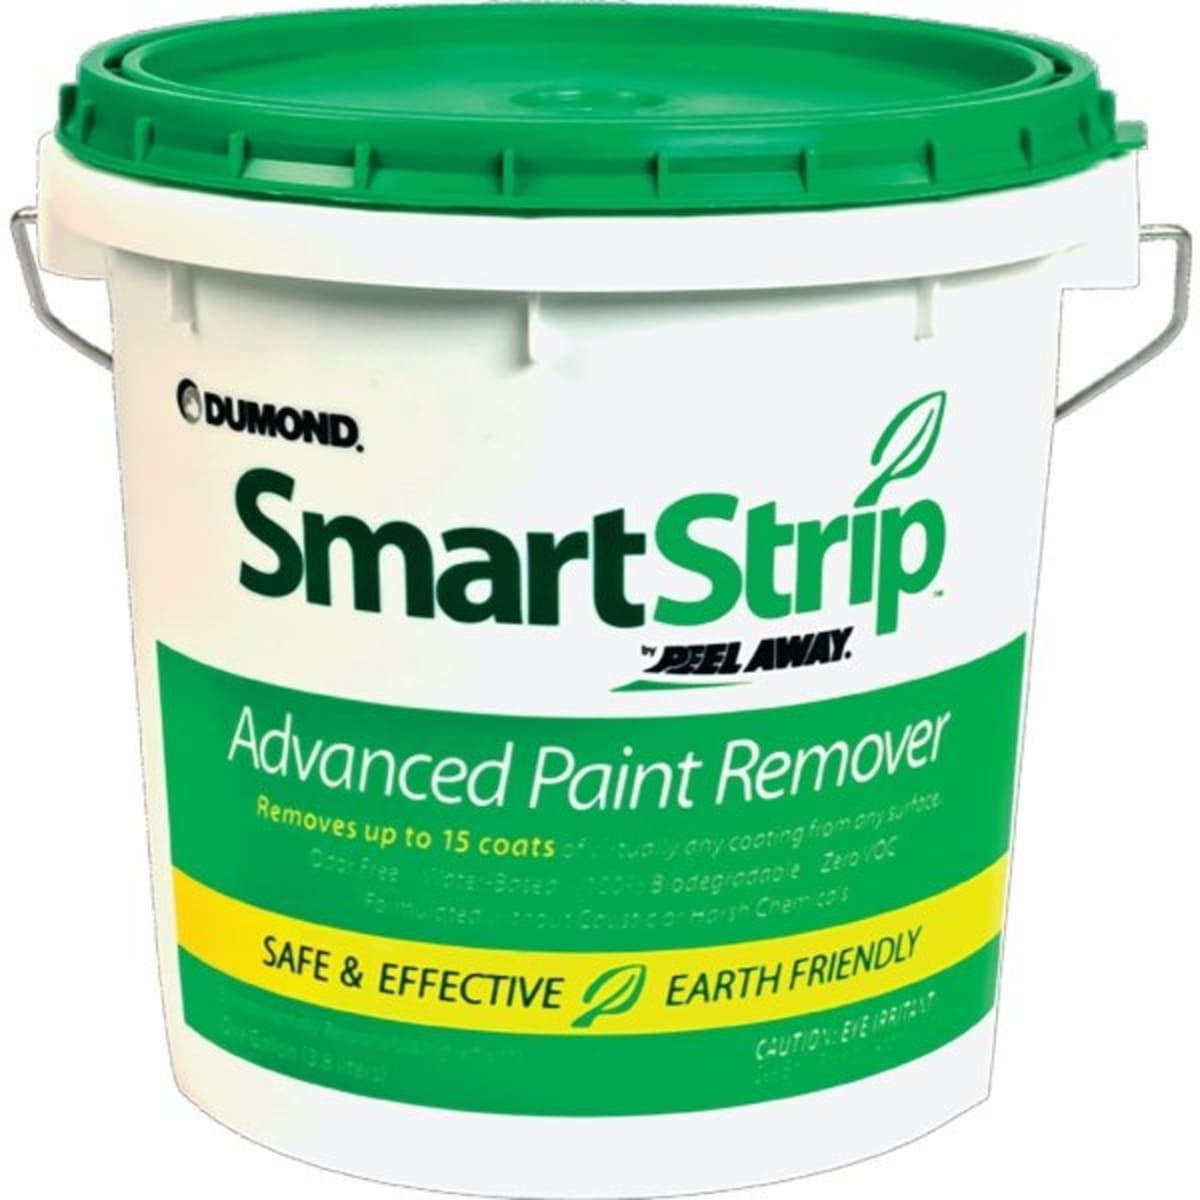 Removal of latex paint from linoleum